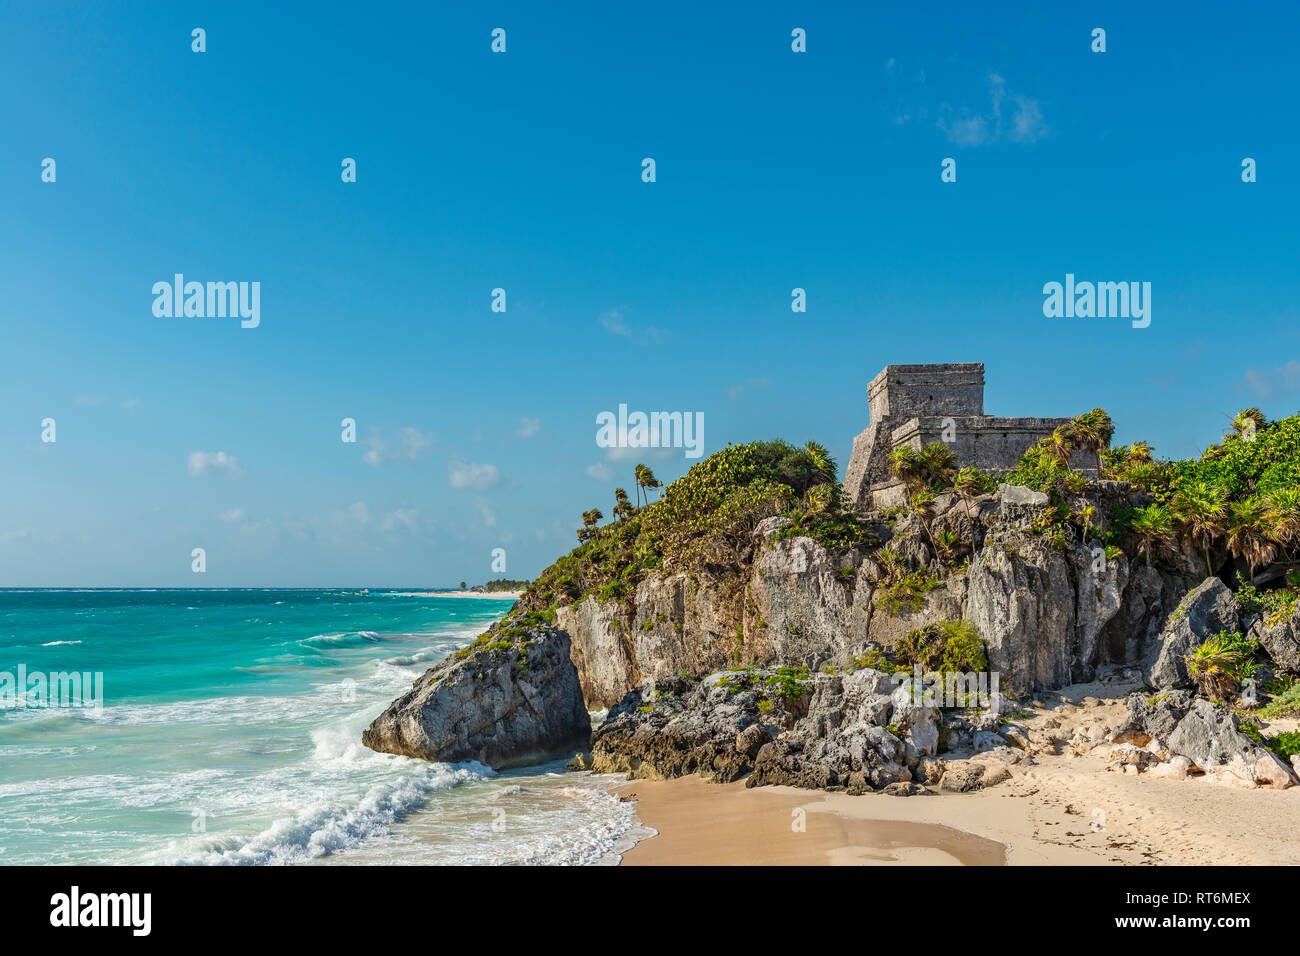 The God of Winds temple in the Maya ruin complex of Tulum with its paradise beach, Quintana Roo state, Yucatan Peninsula, Mexico. Stock Photo